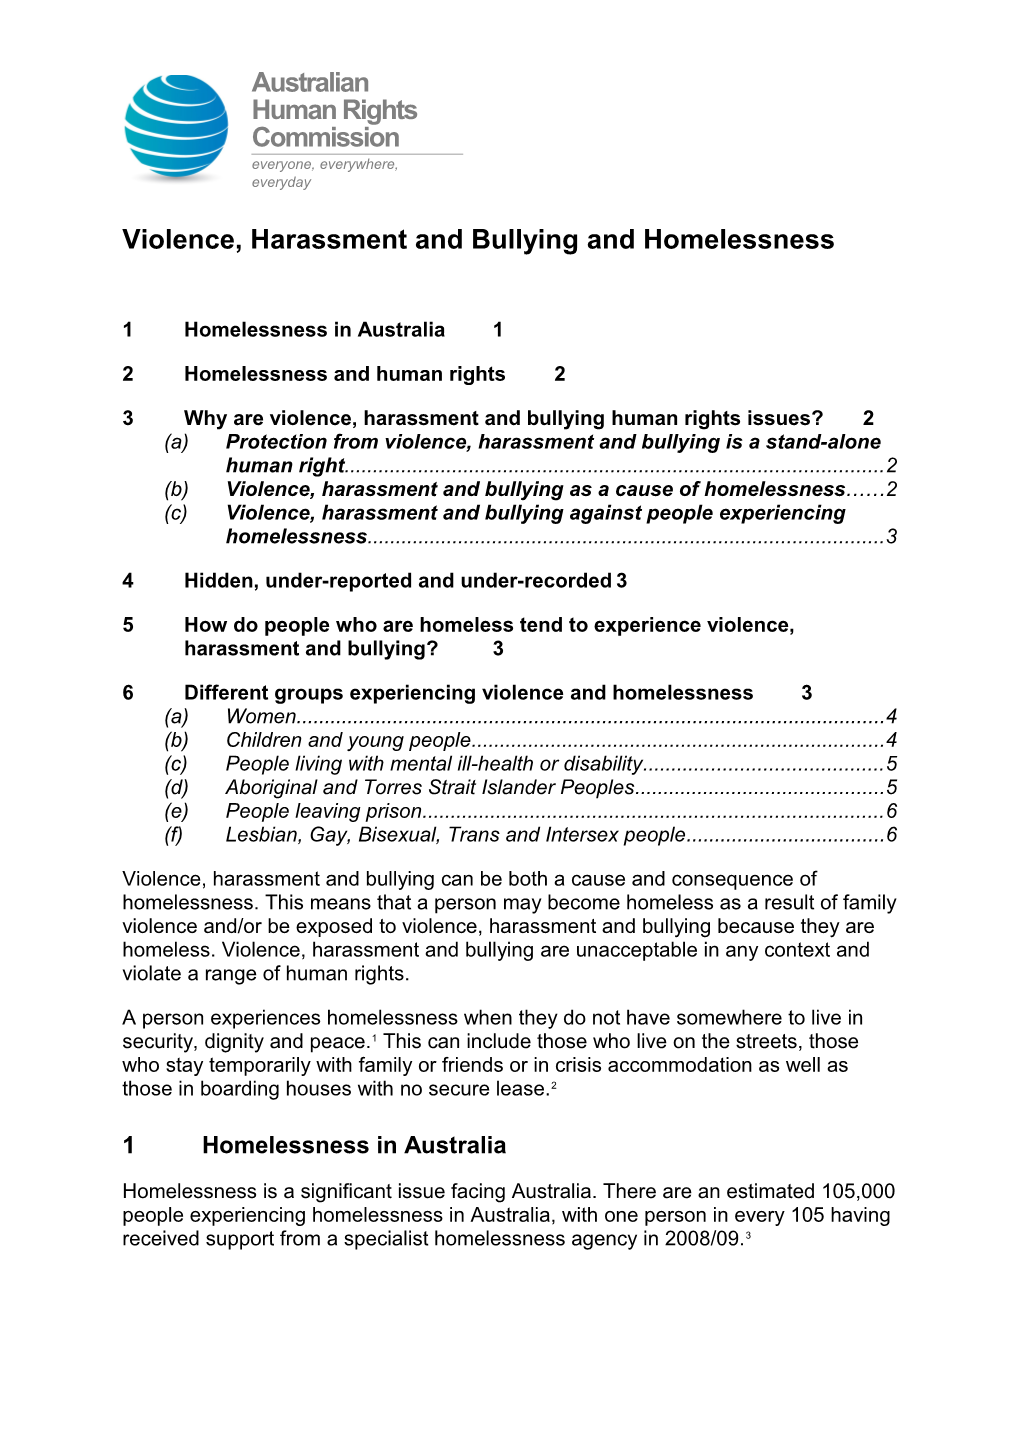 3Why Are Violence, Harassment and Bullying Human Rights Issues?